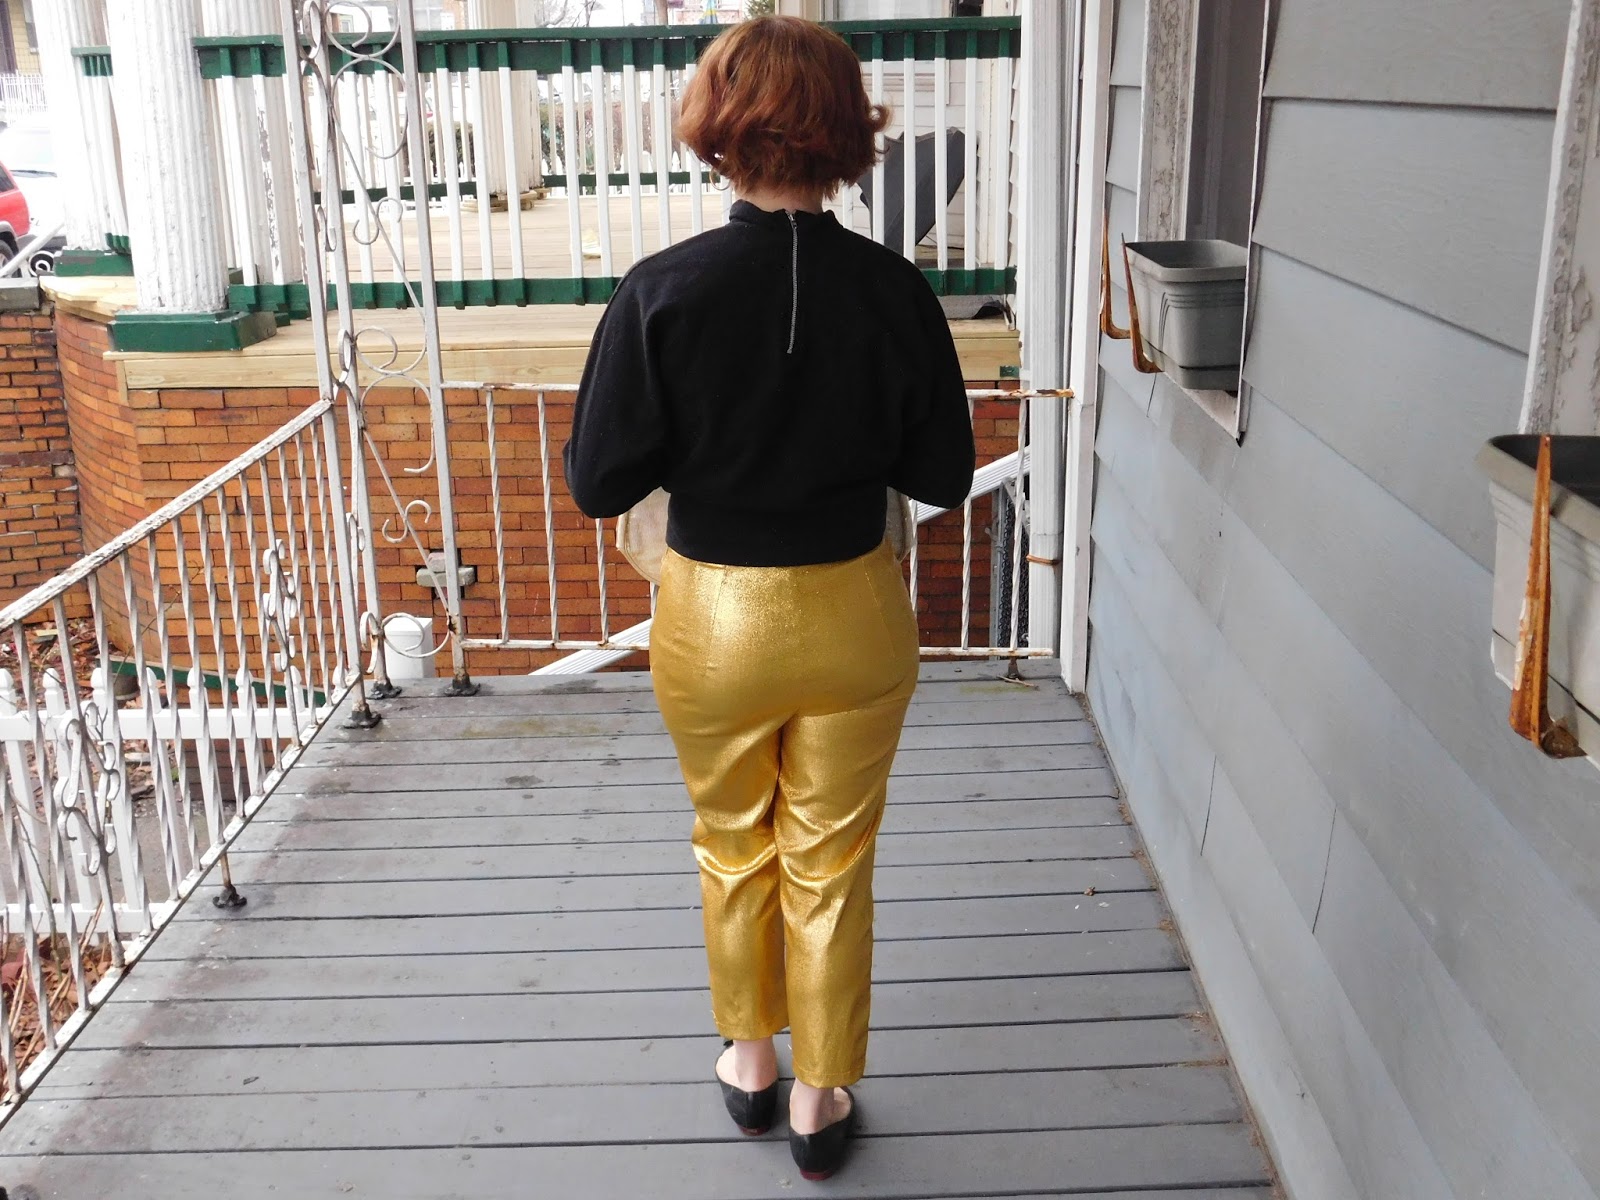 Piplotex 1950s Cigarette Green High Waisted Pants